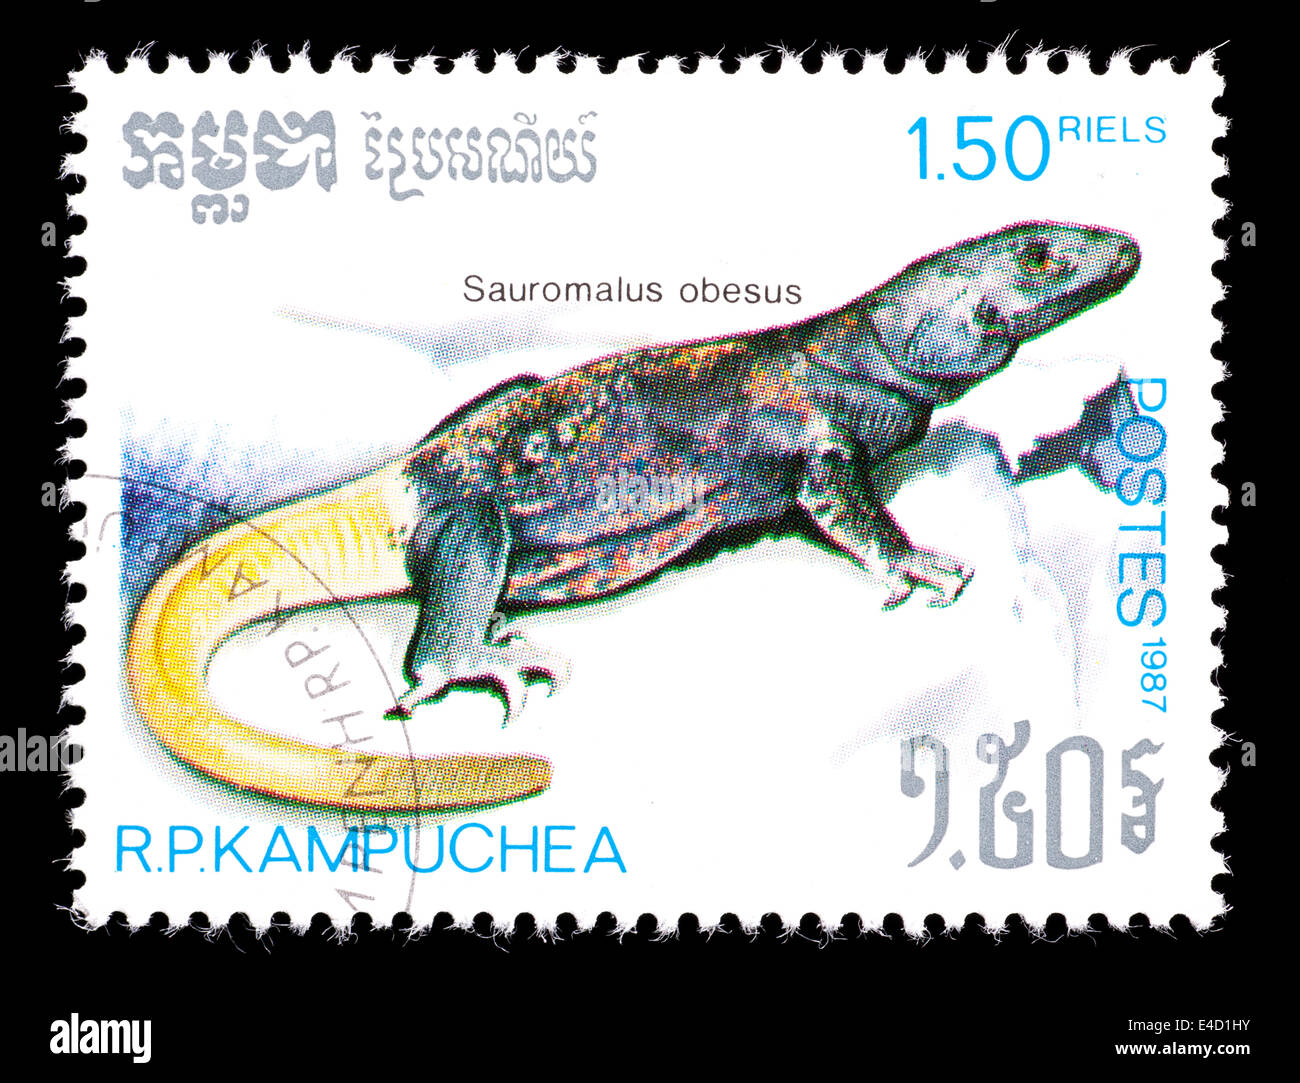 Postage stamp from Cambodia (Kampuchea) depicting a chuckwalla (Saurolaus obesus) Stock Photo